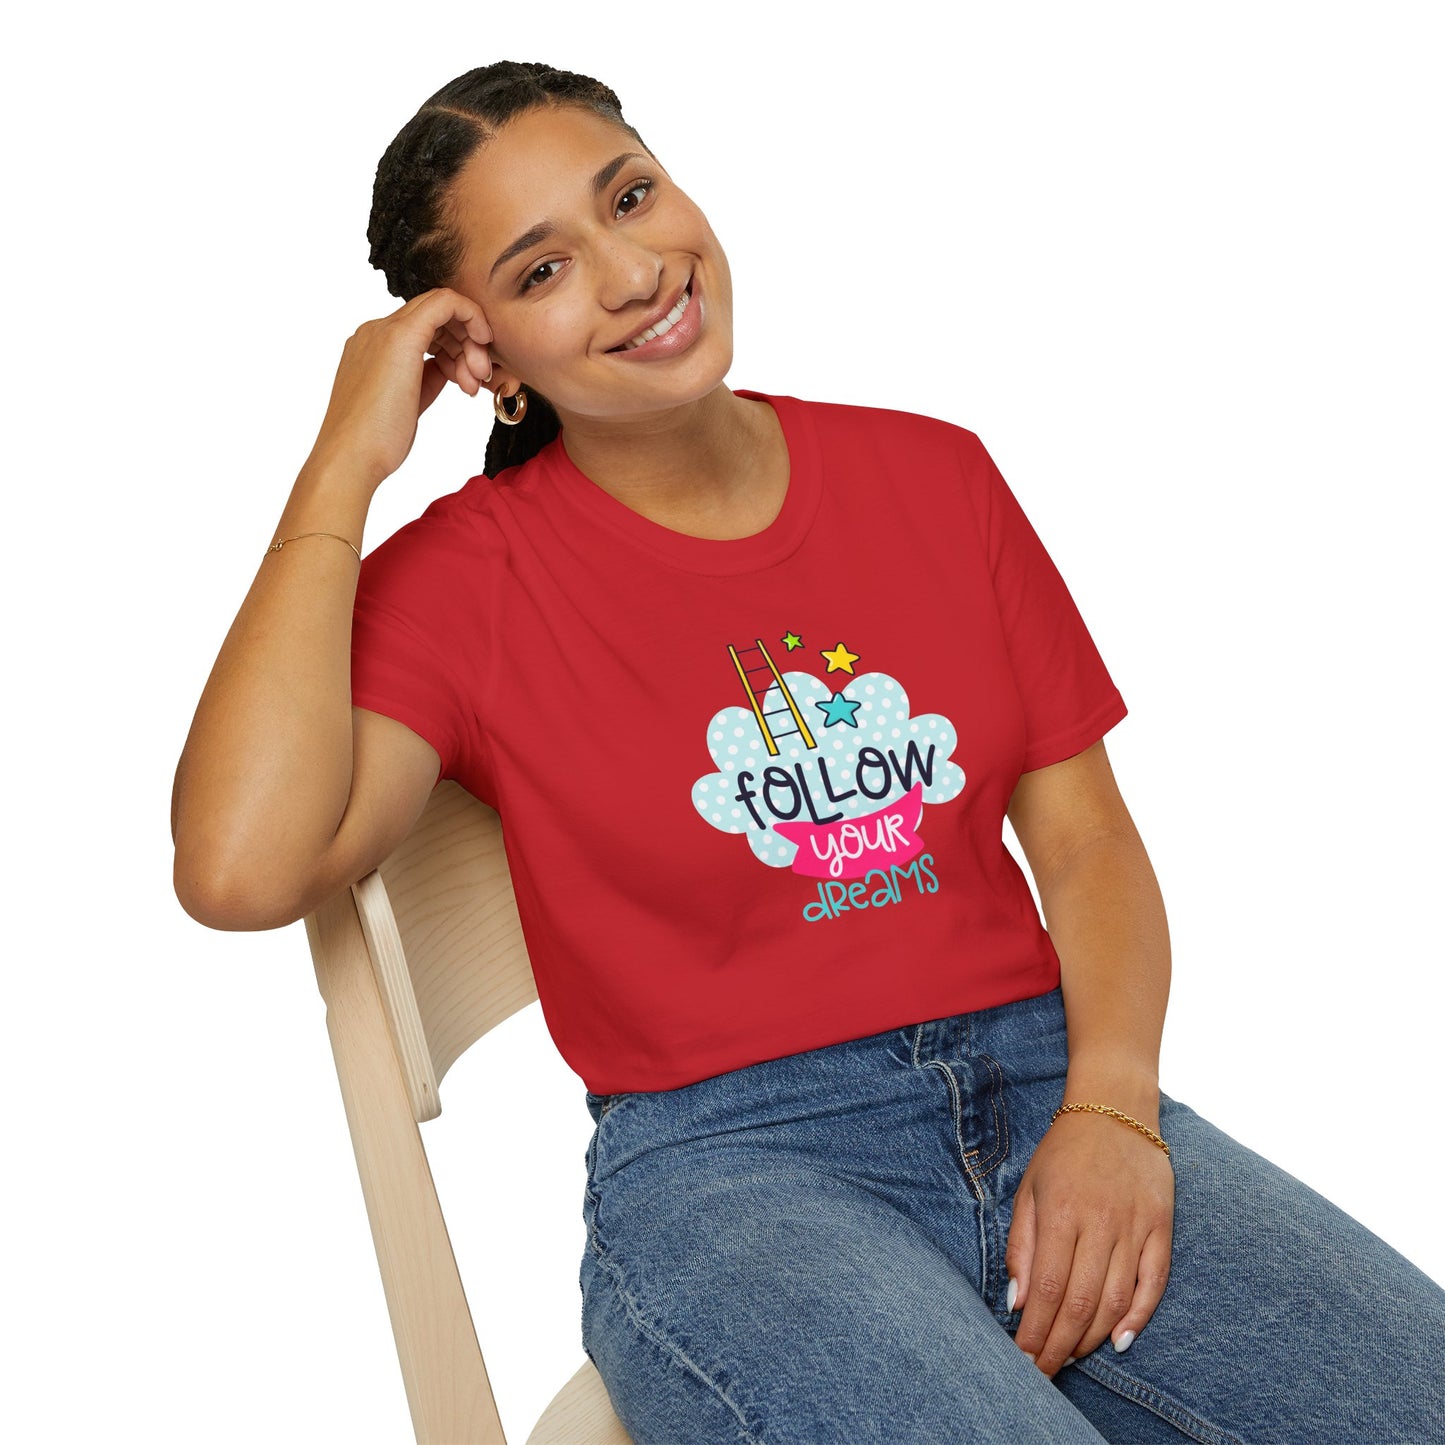 Chase Your Goals in Style with Our 'Follow Your Dreams' T-shirts - Inspire Every Step!